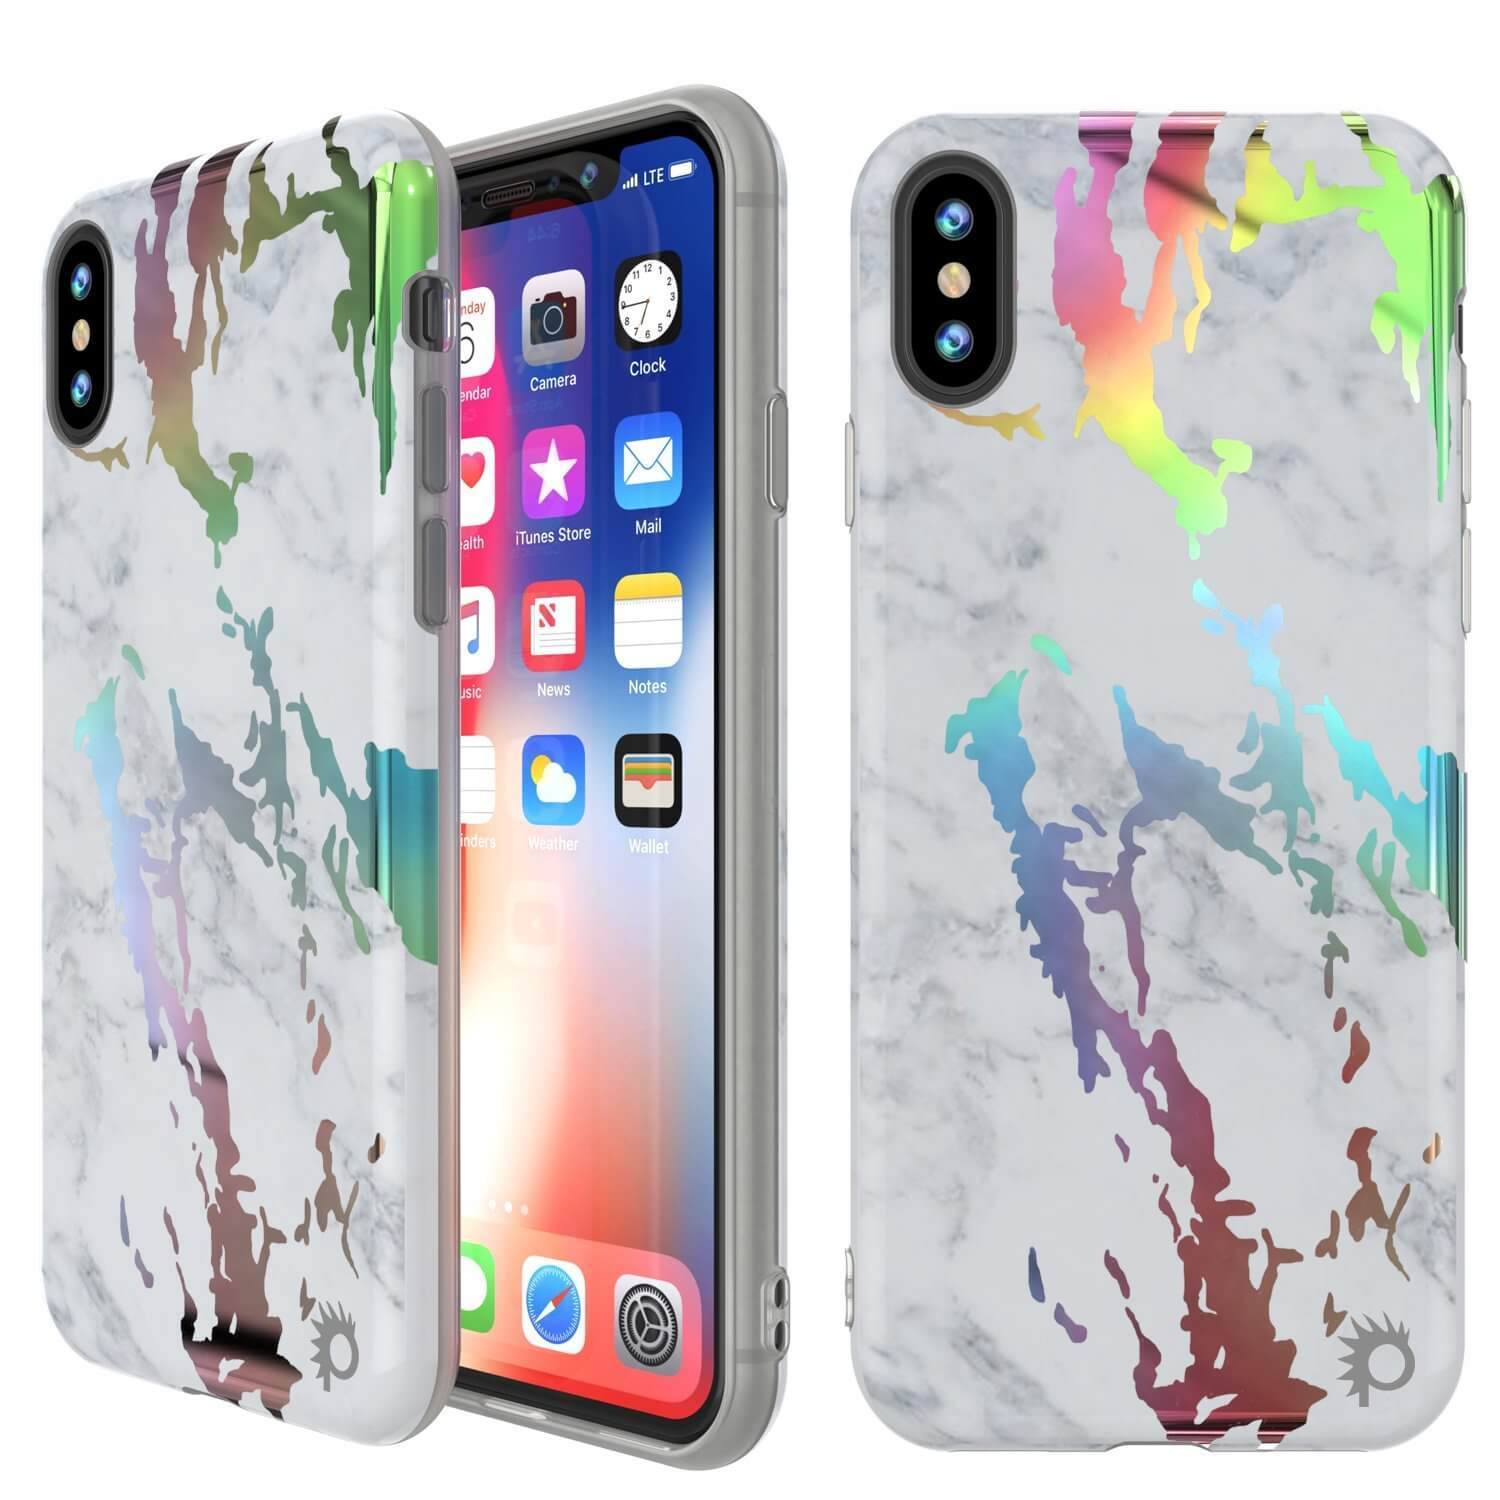 Punkcase iPhone X Marble Case, Protective Full Body Cover W/9H Tempered Glass Screen Protector (Blanco Marmo)